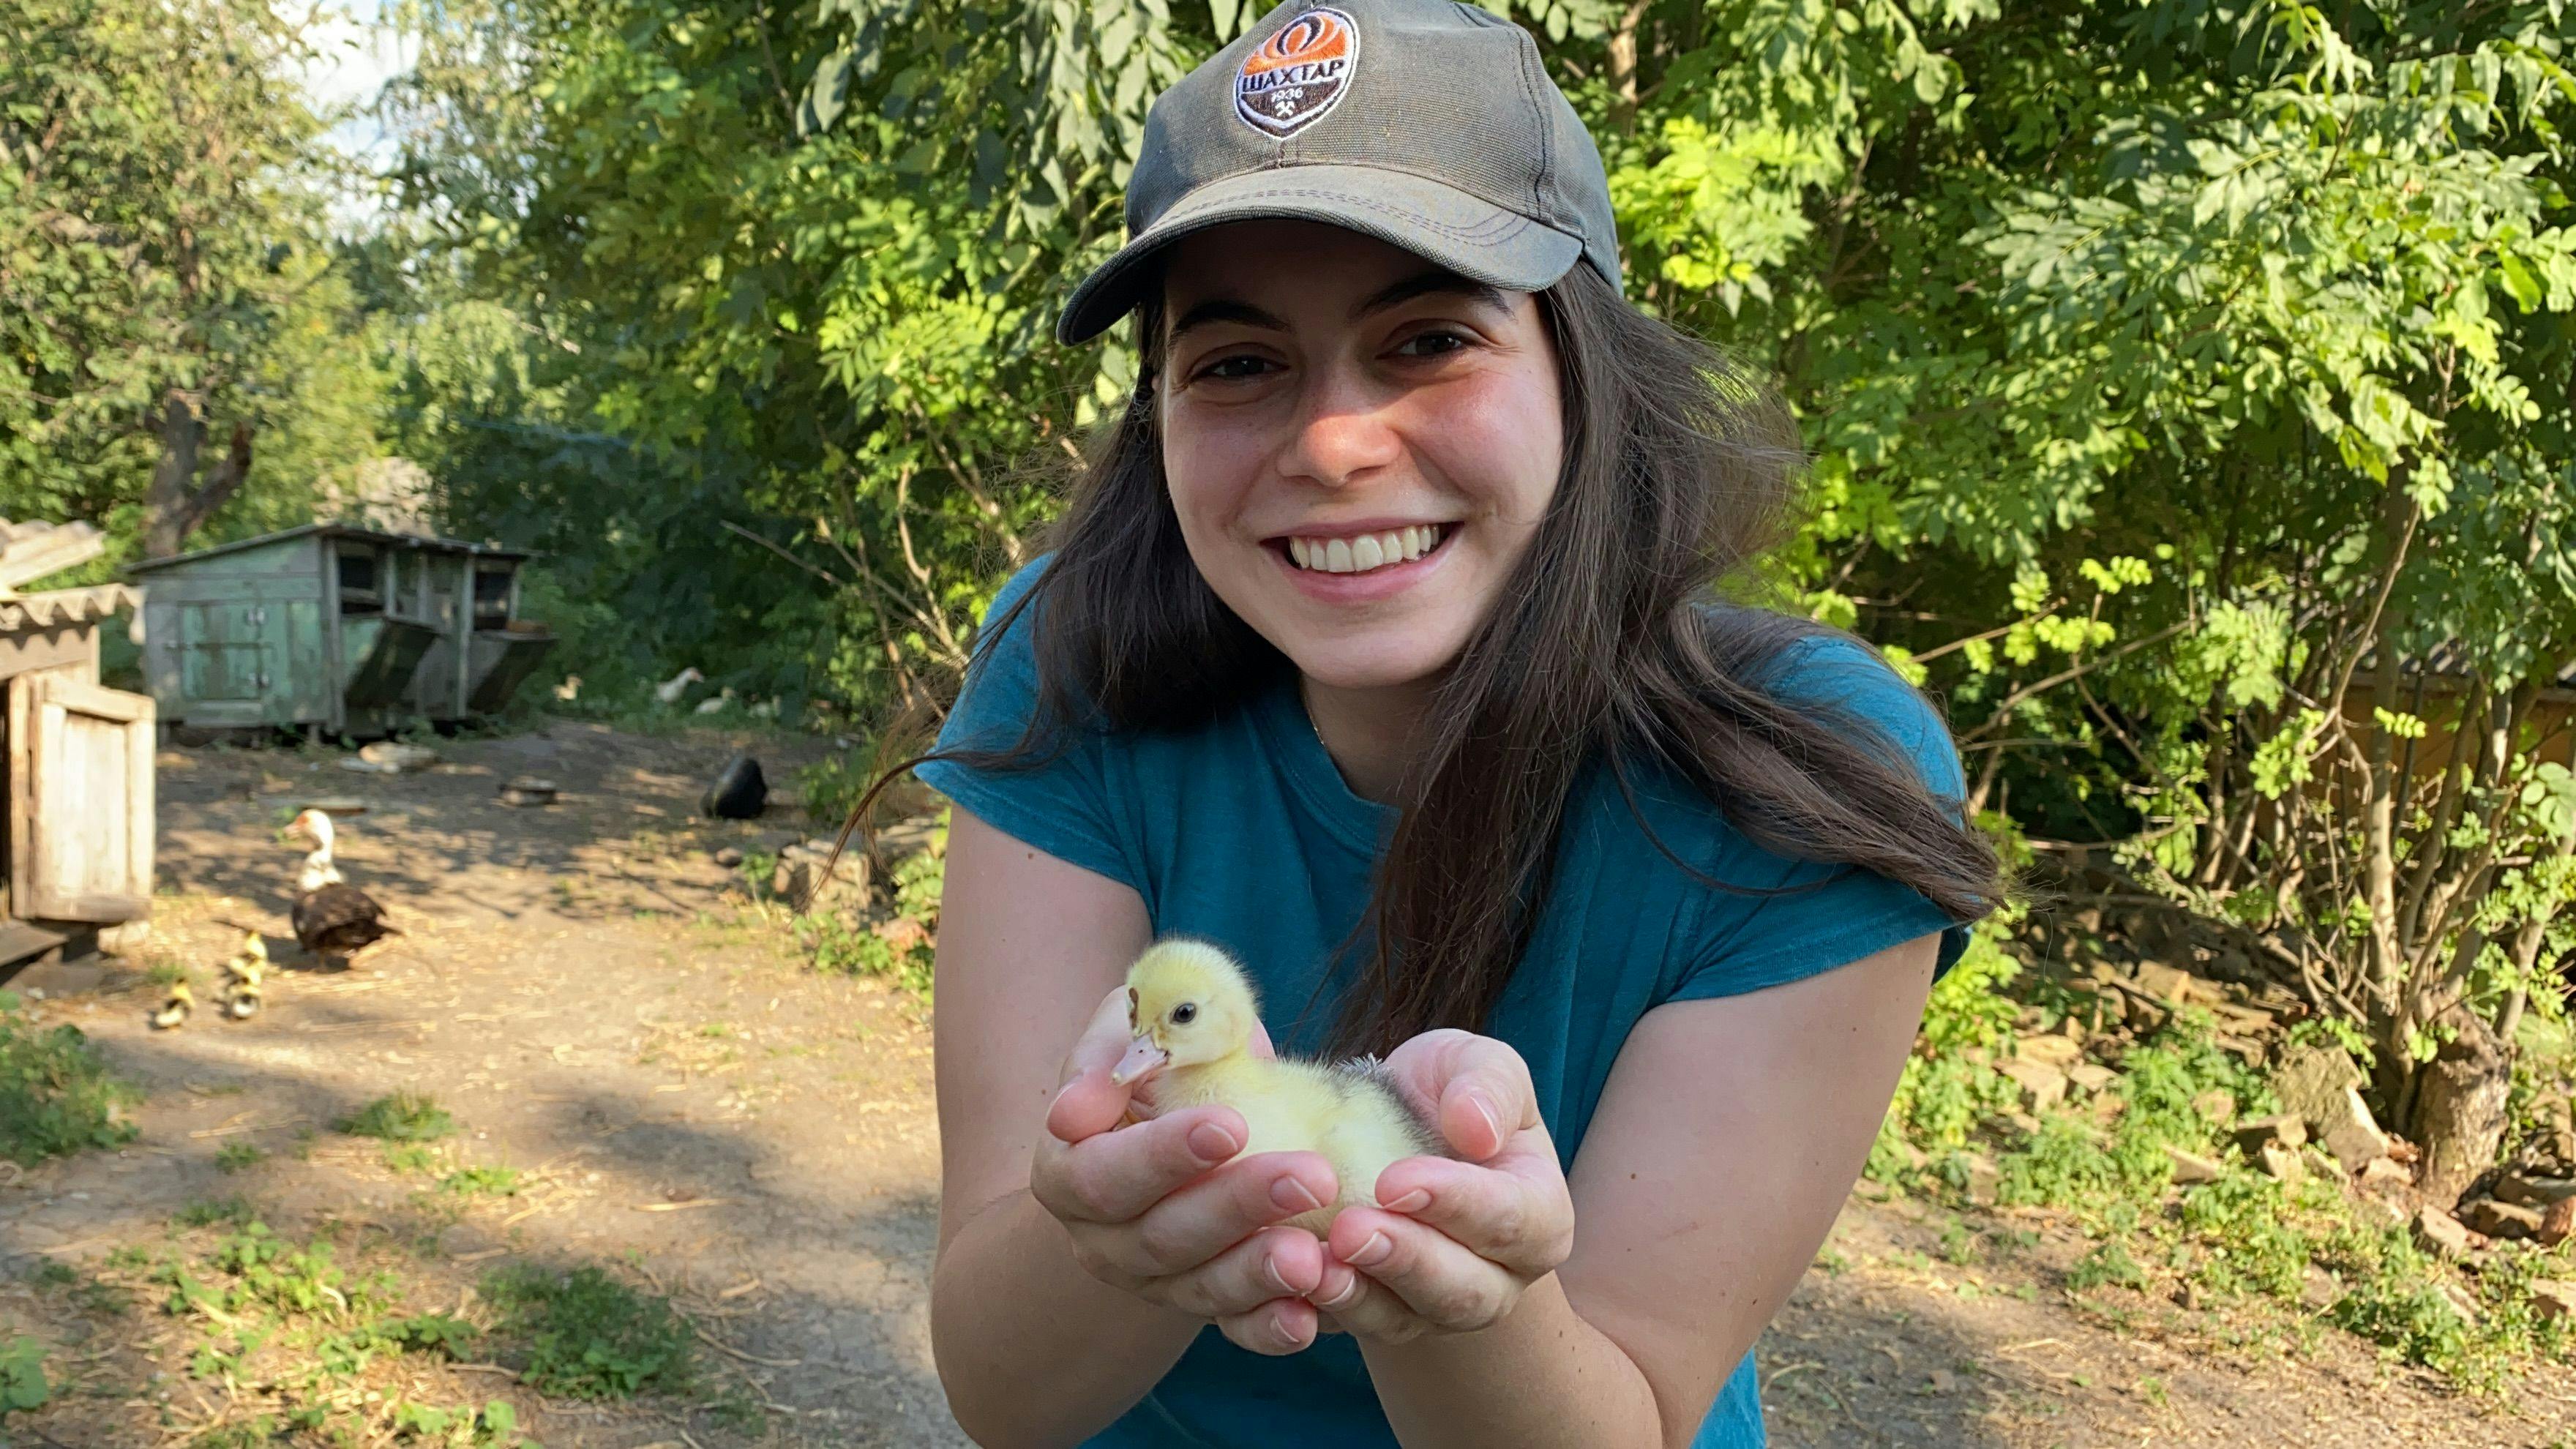 Maryna Mullerman, a first year D.V.M. student at the Cornell University College of Veterinary Medicine, holds a duckling while visiting her grandparents in the countryside outside of Kharkiv, Ukraine, in August 2021.